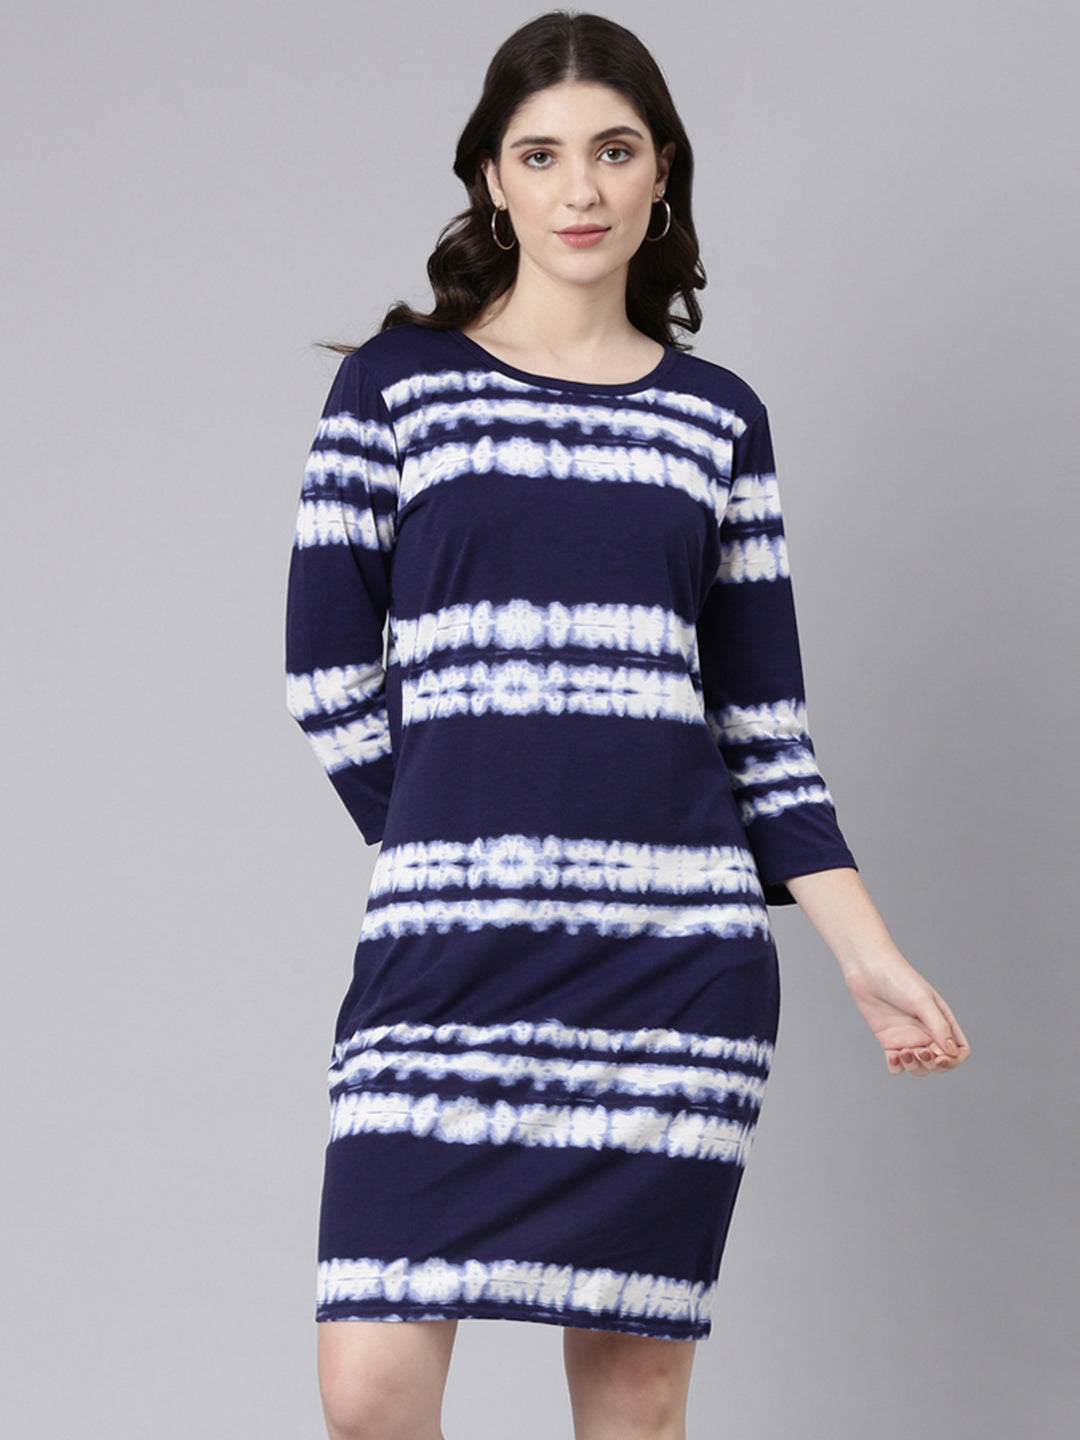 TheShaili Cotton Blue Knee Length Dress/Round Neck 3/4 Sleeves Tie-Dye Dresses for Women and Girls